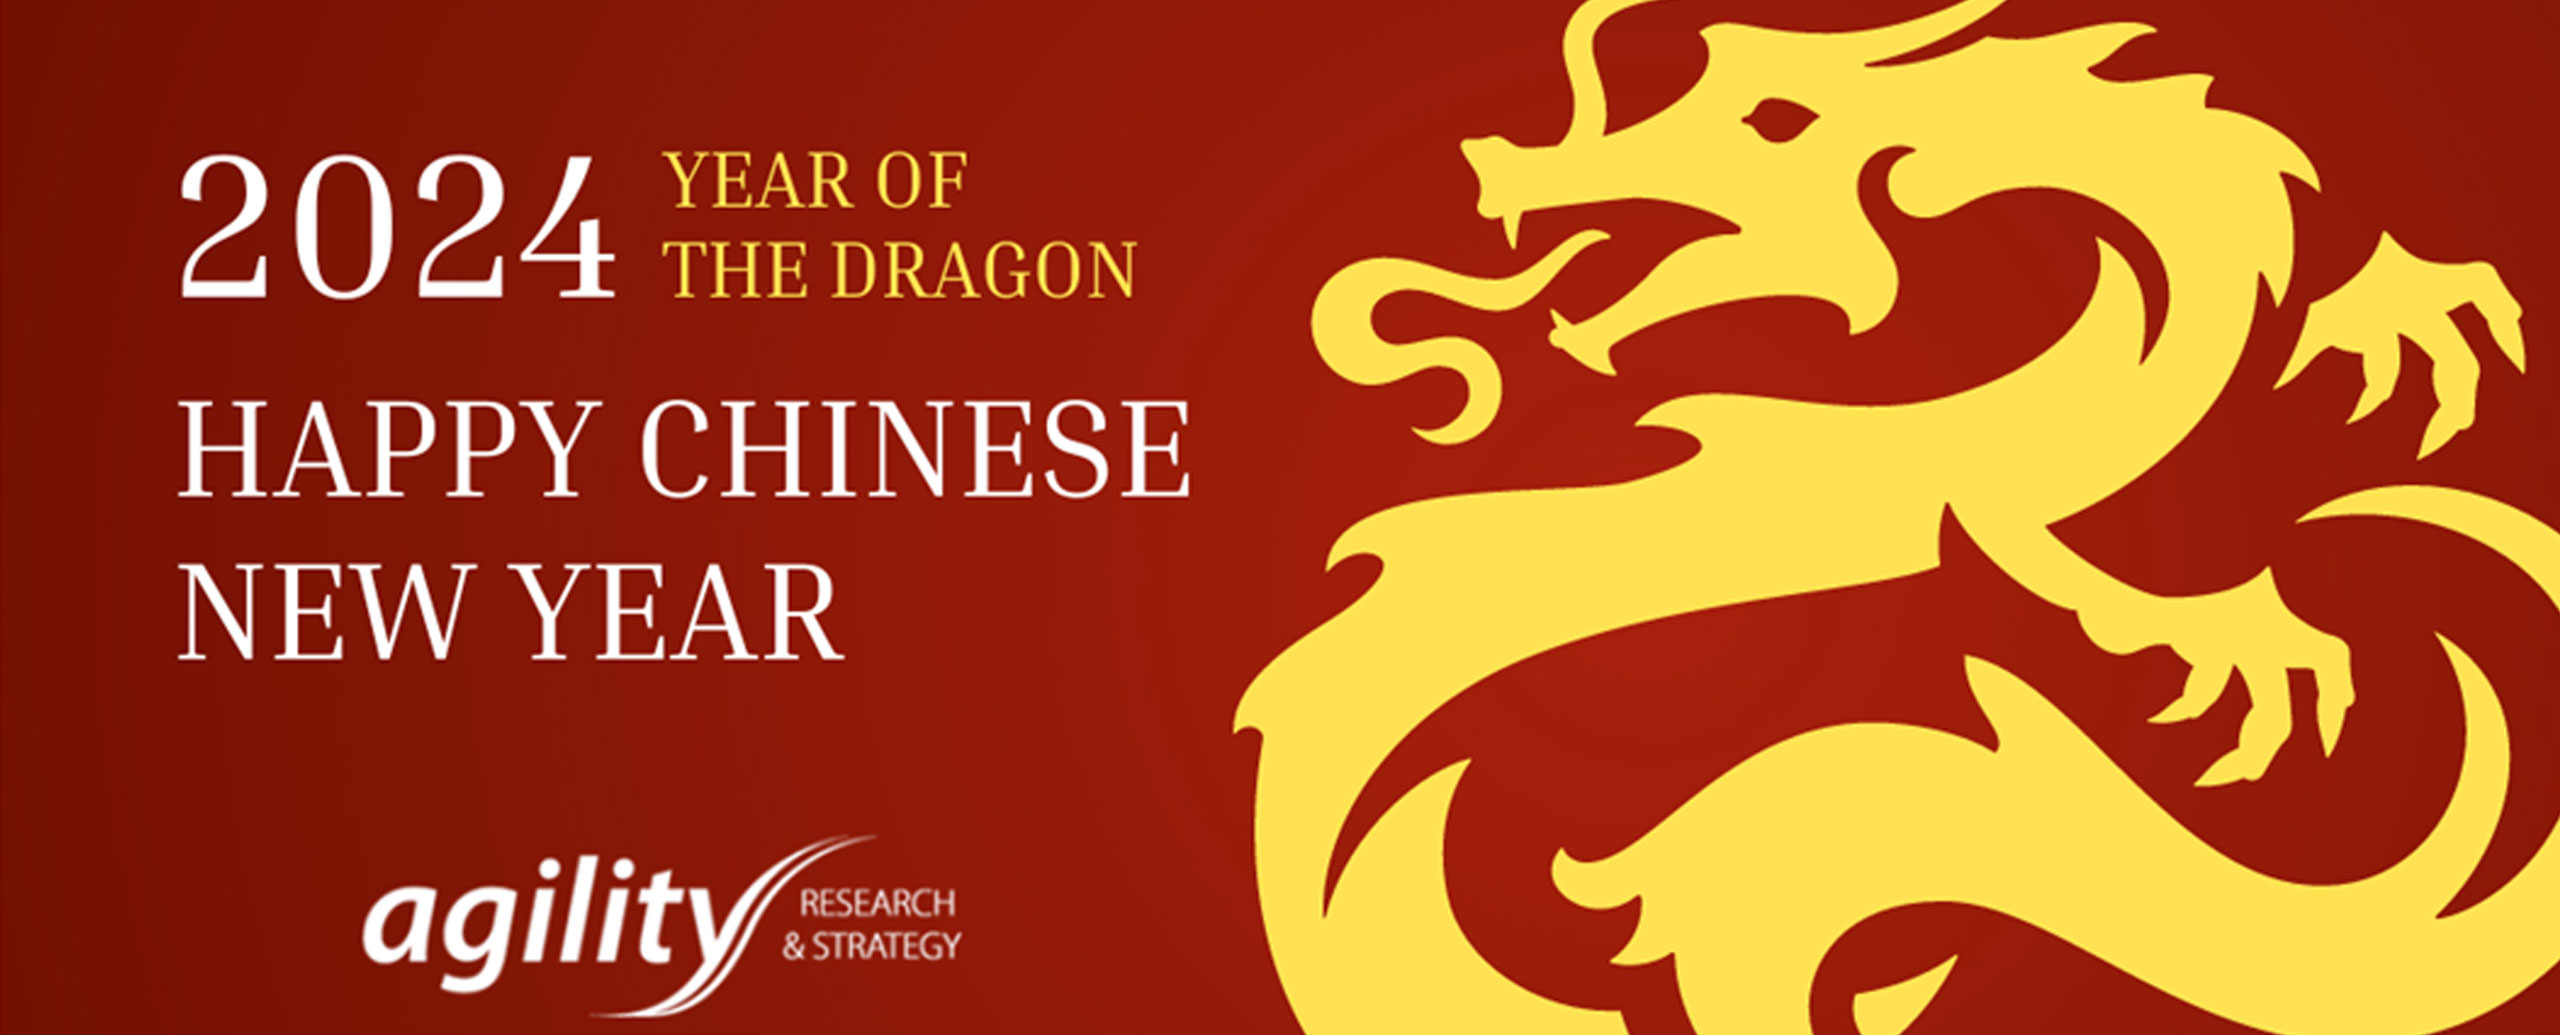 Happy Chinese New Year - Year of the Dragon